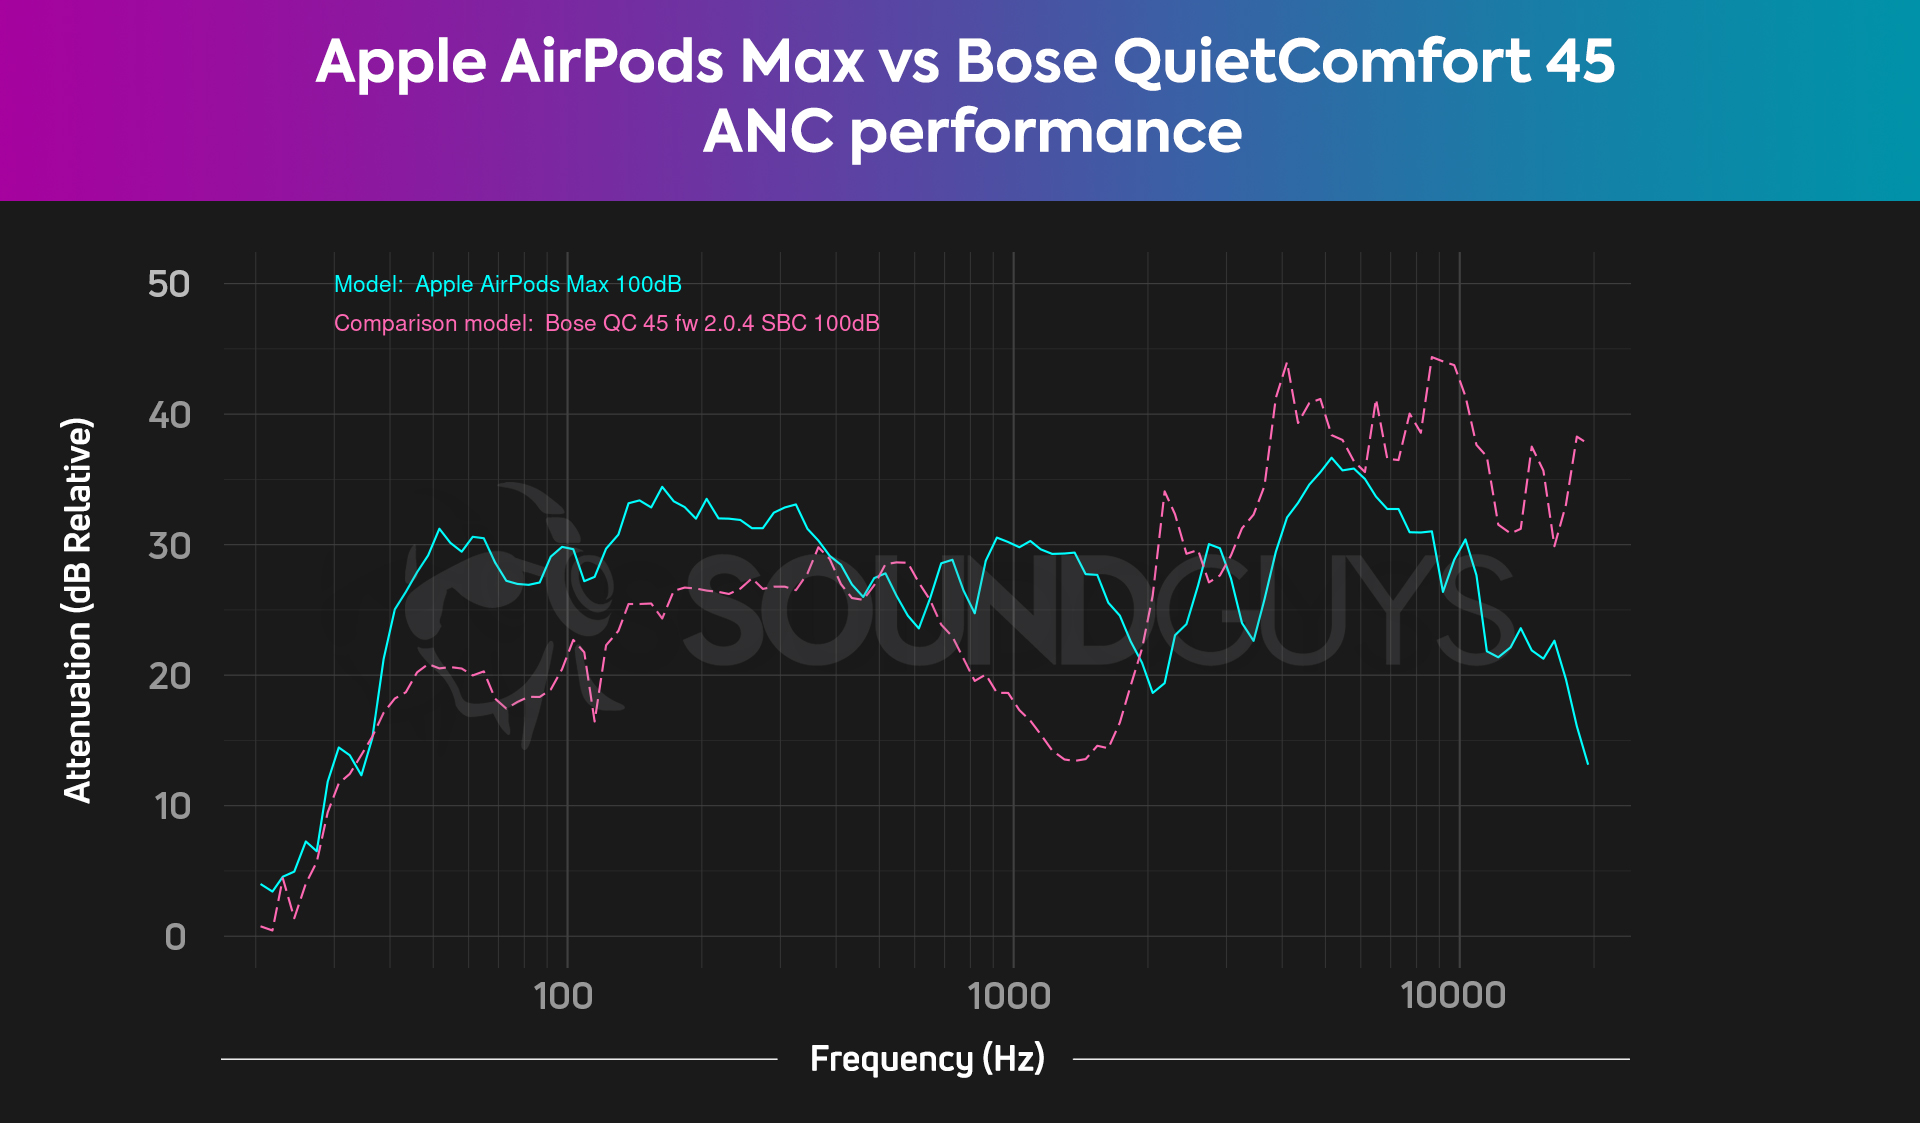 Charts shows noise canceling performance of the Apple AirPods Max versus the Bose QuietComfort 45.